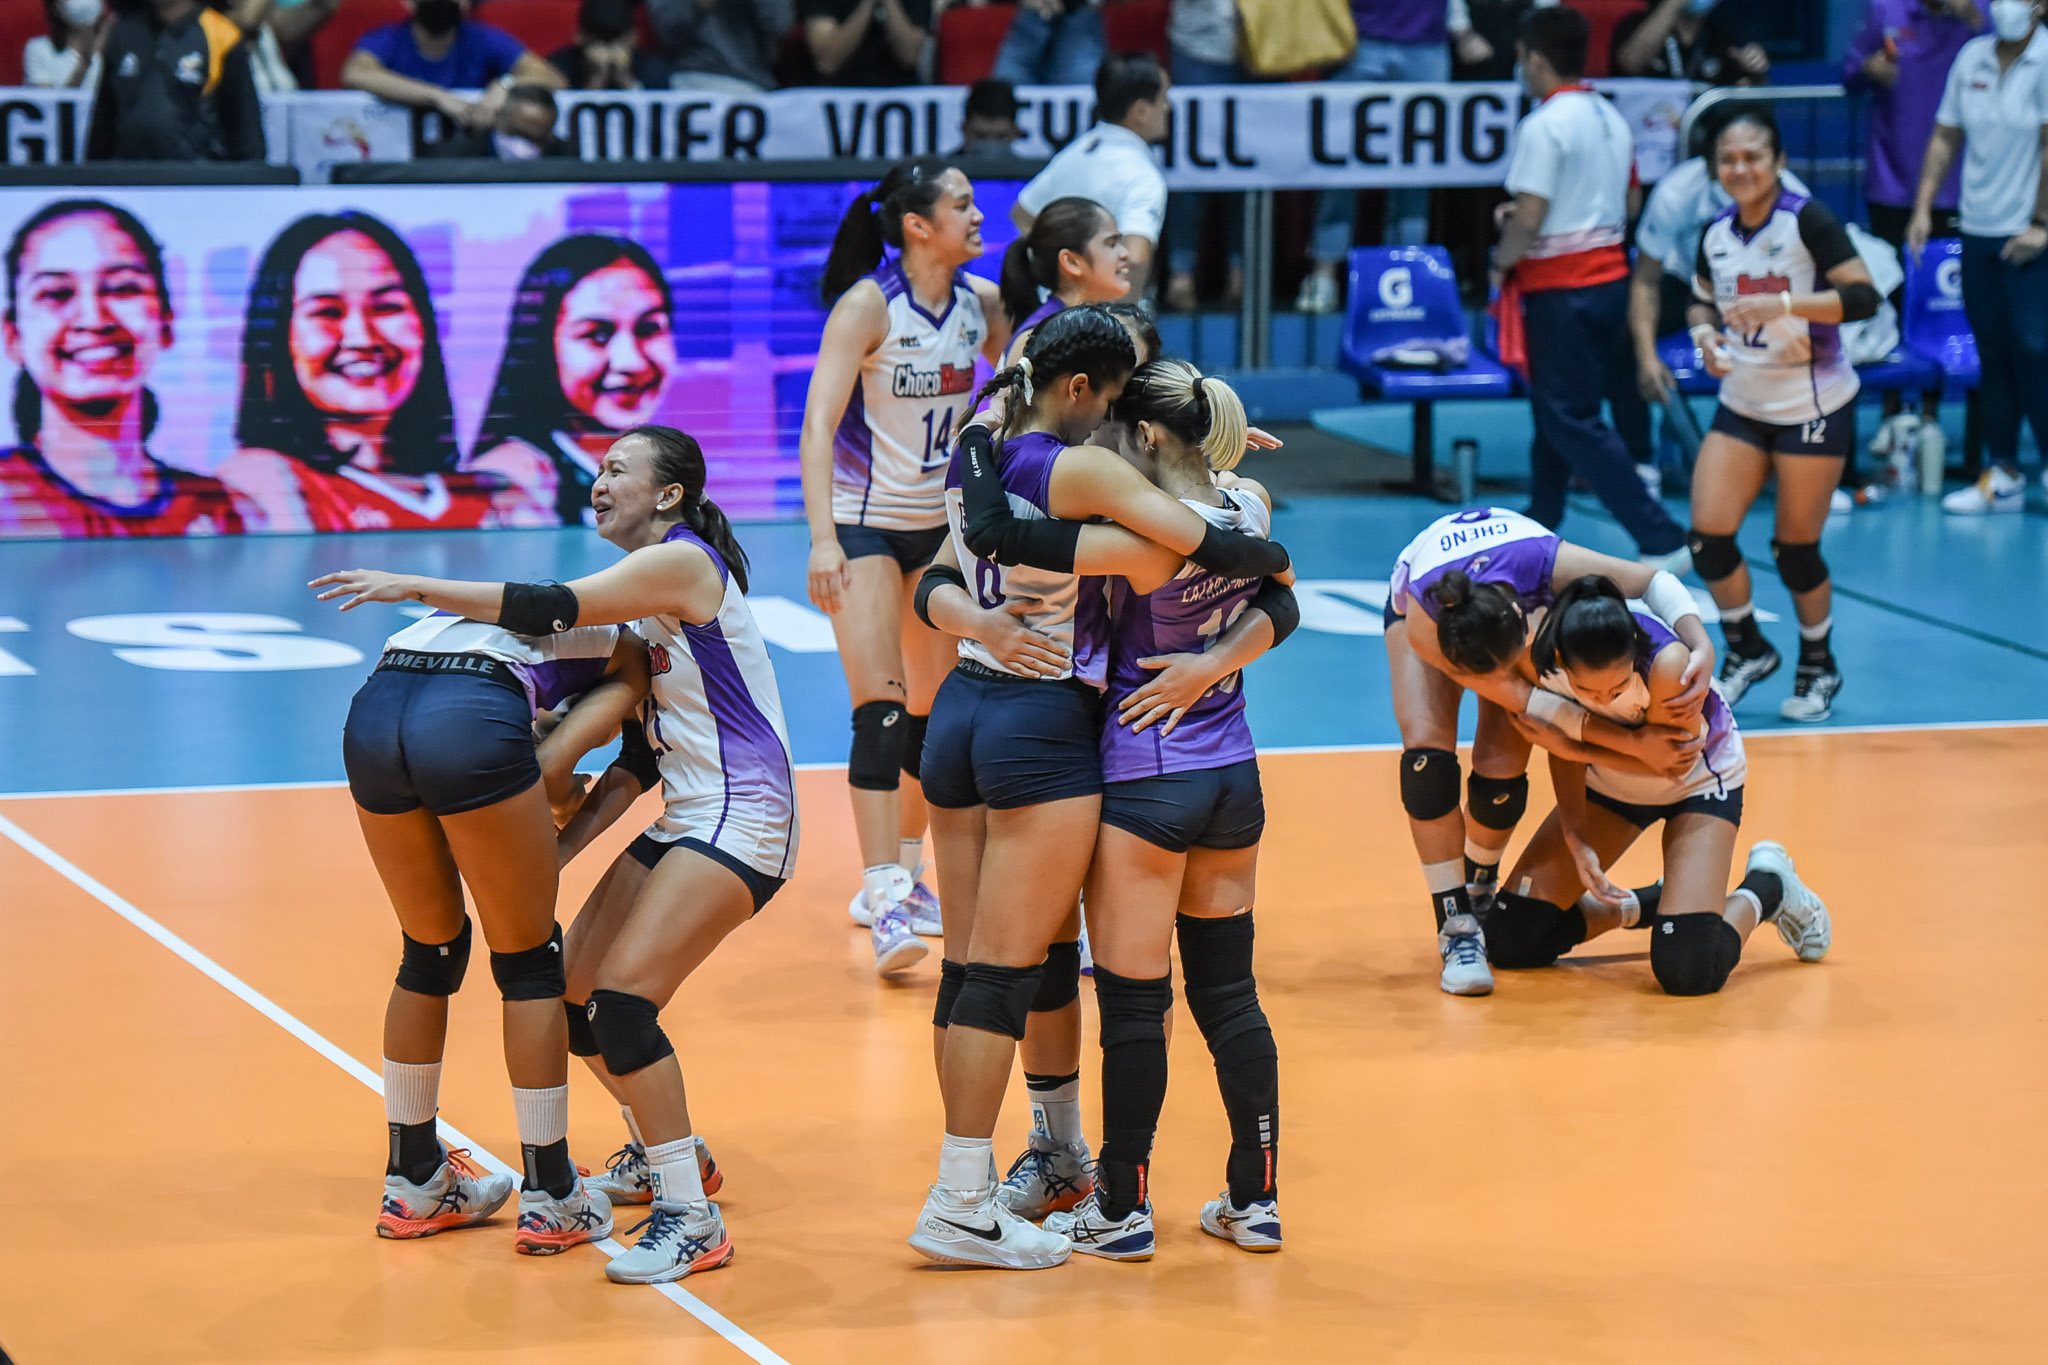 2022-PVL-Invitational-Choco-Mucho-vs.-PLDT-5457 Kat Tolentino makes up for lost time with Choco Mucho News PVL Volleyball  - philippine sports news